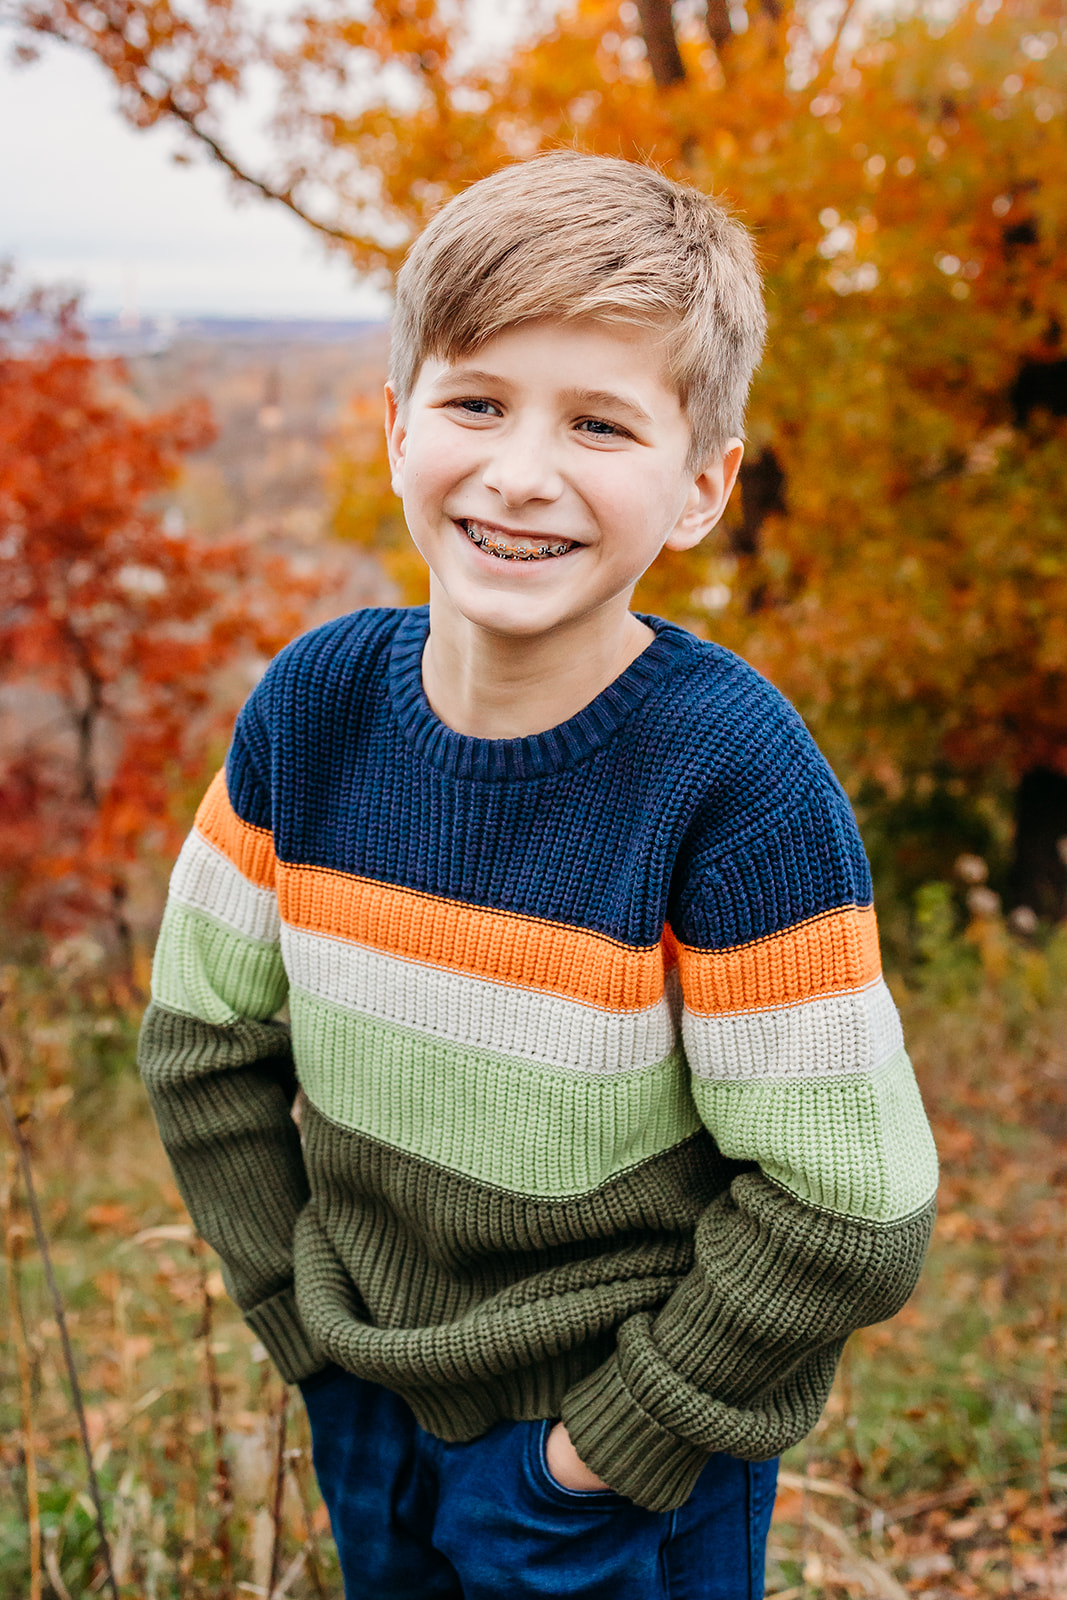 A young boy in a colorful knit sweater stands in a park in fall with hands in his pockets after visiting Pediatric Dentist Chippewa Falls, WI